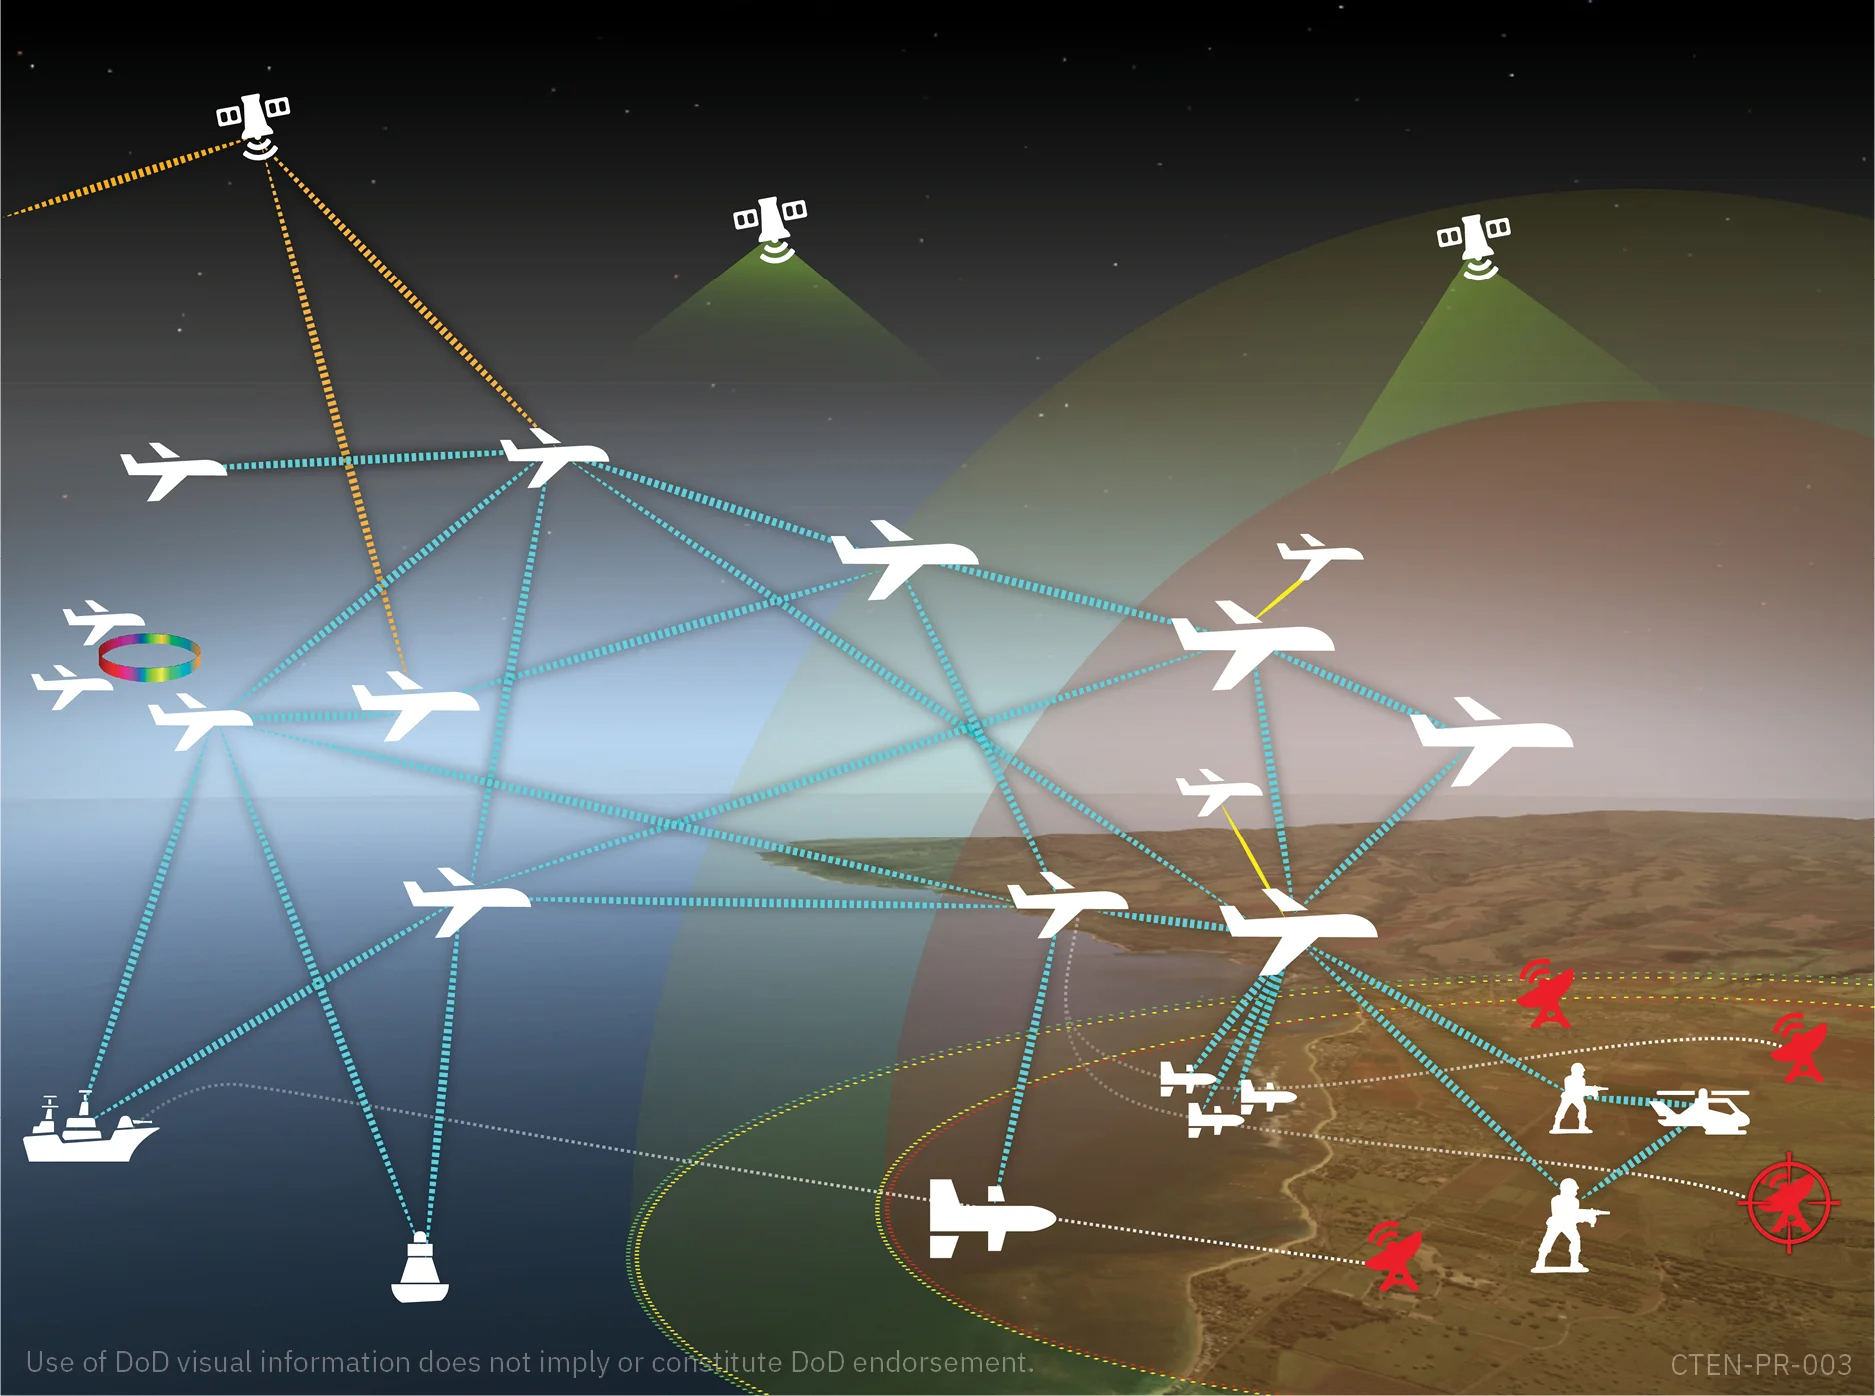 The Common Tactical Edge Network converges military and commercial networks to enhance aerial interoperability between U.S. and allied forces.